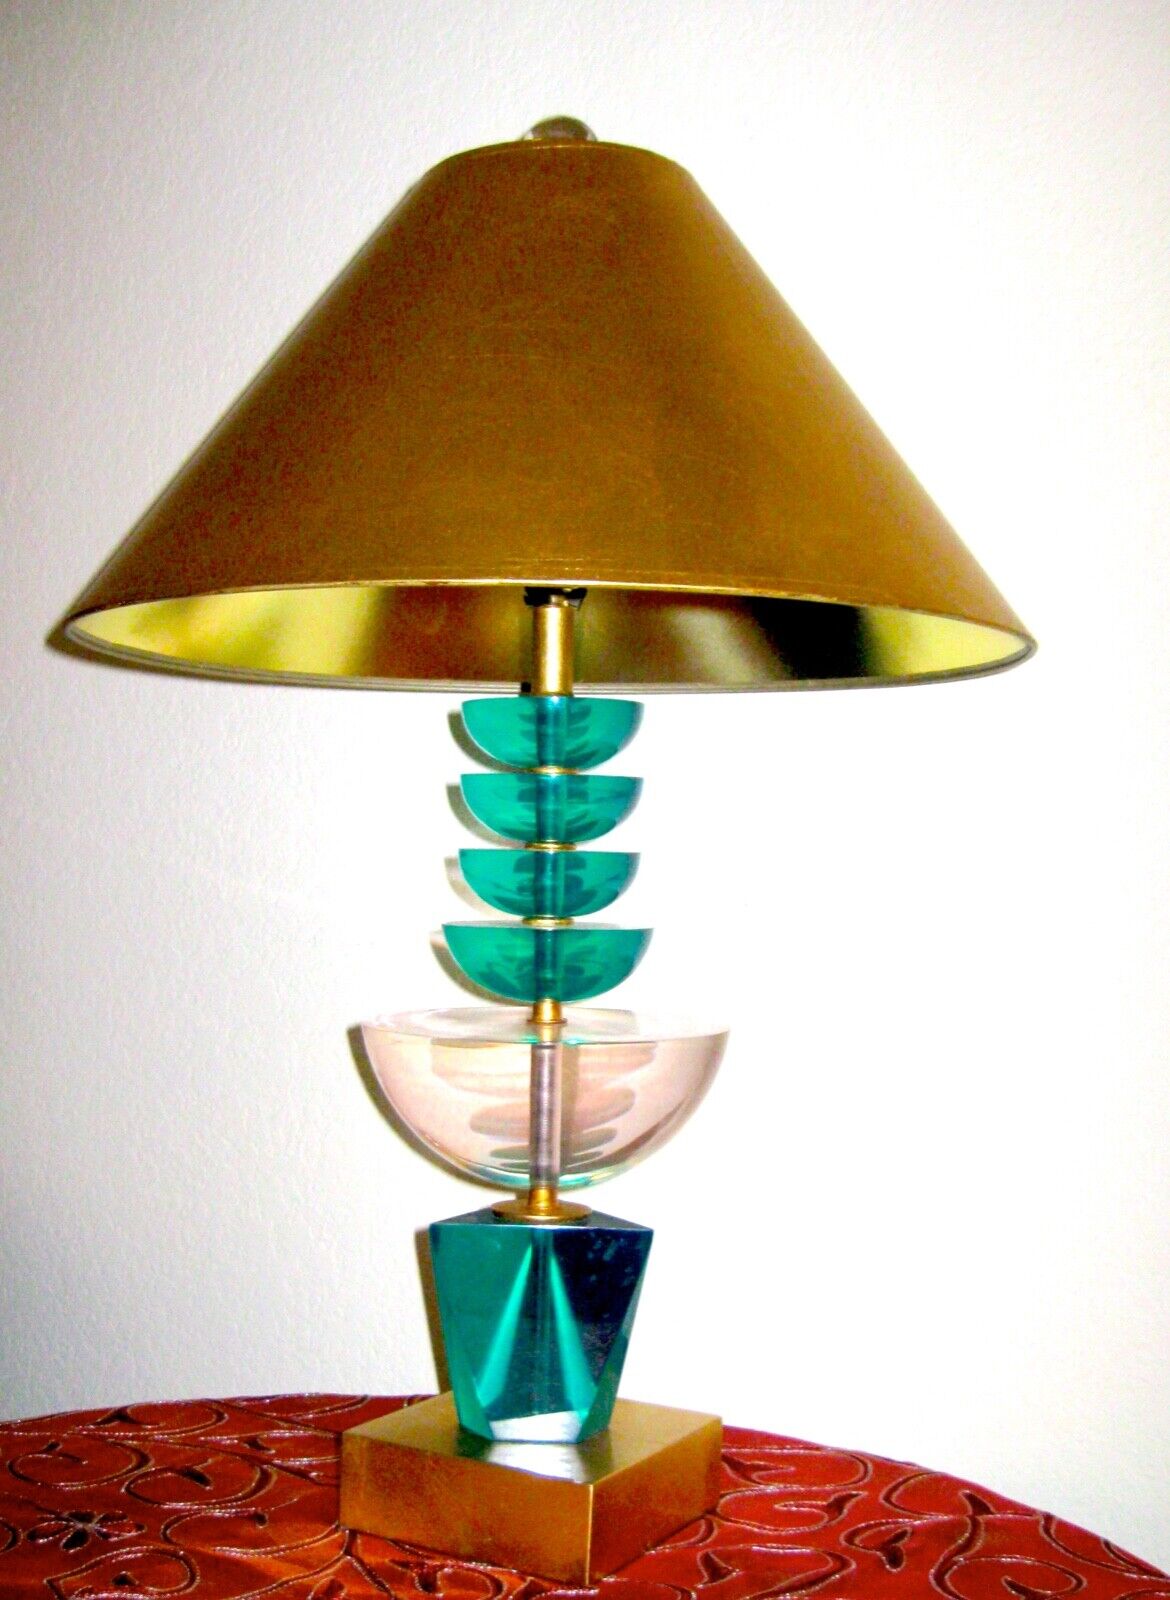 Vintage 1979 Original Van Teal Stacked Clear and Green/Teal Lucite Table Lamp.